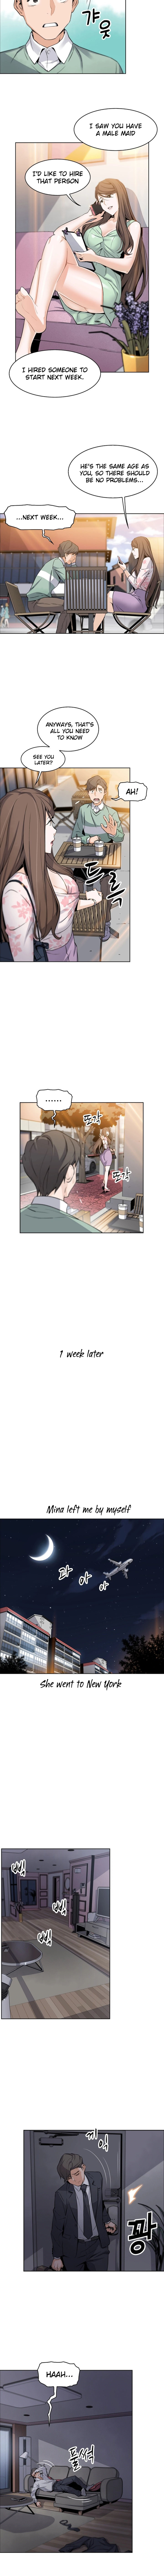 Housekeeper Manhwa - Chapter 7 Page 10